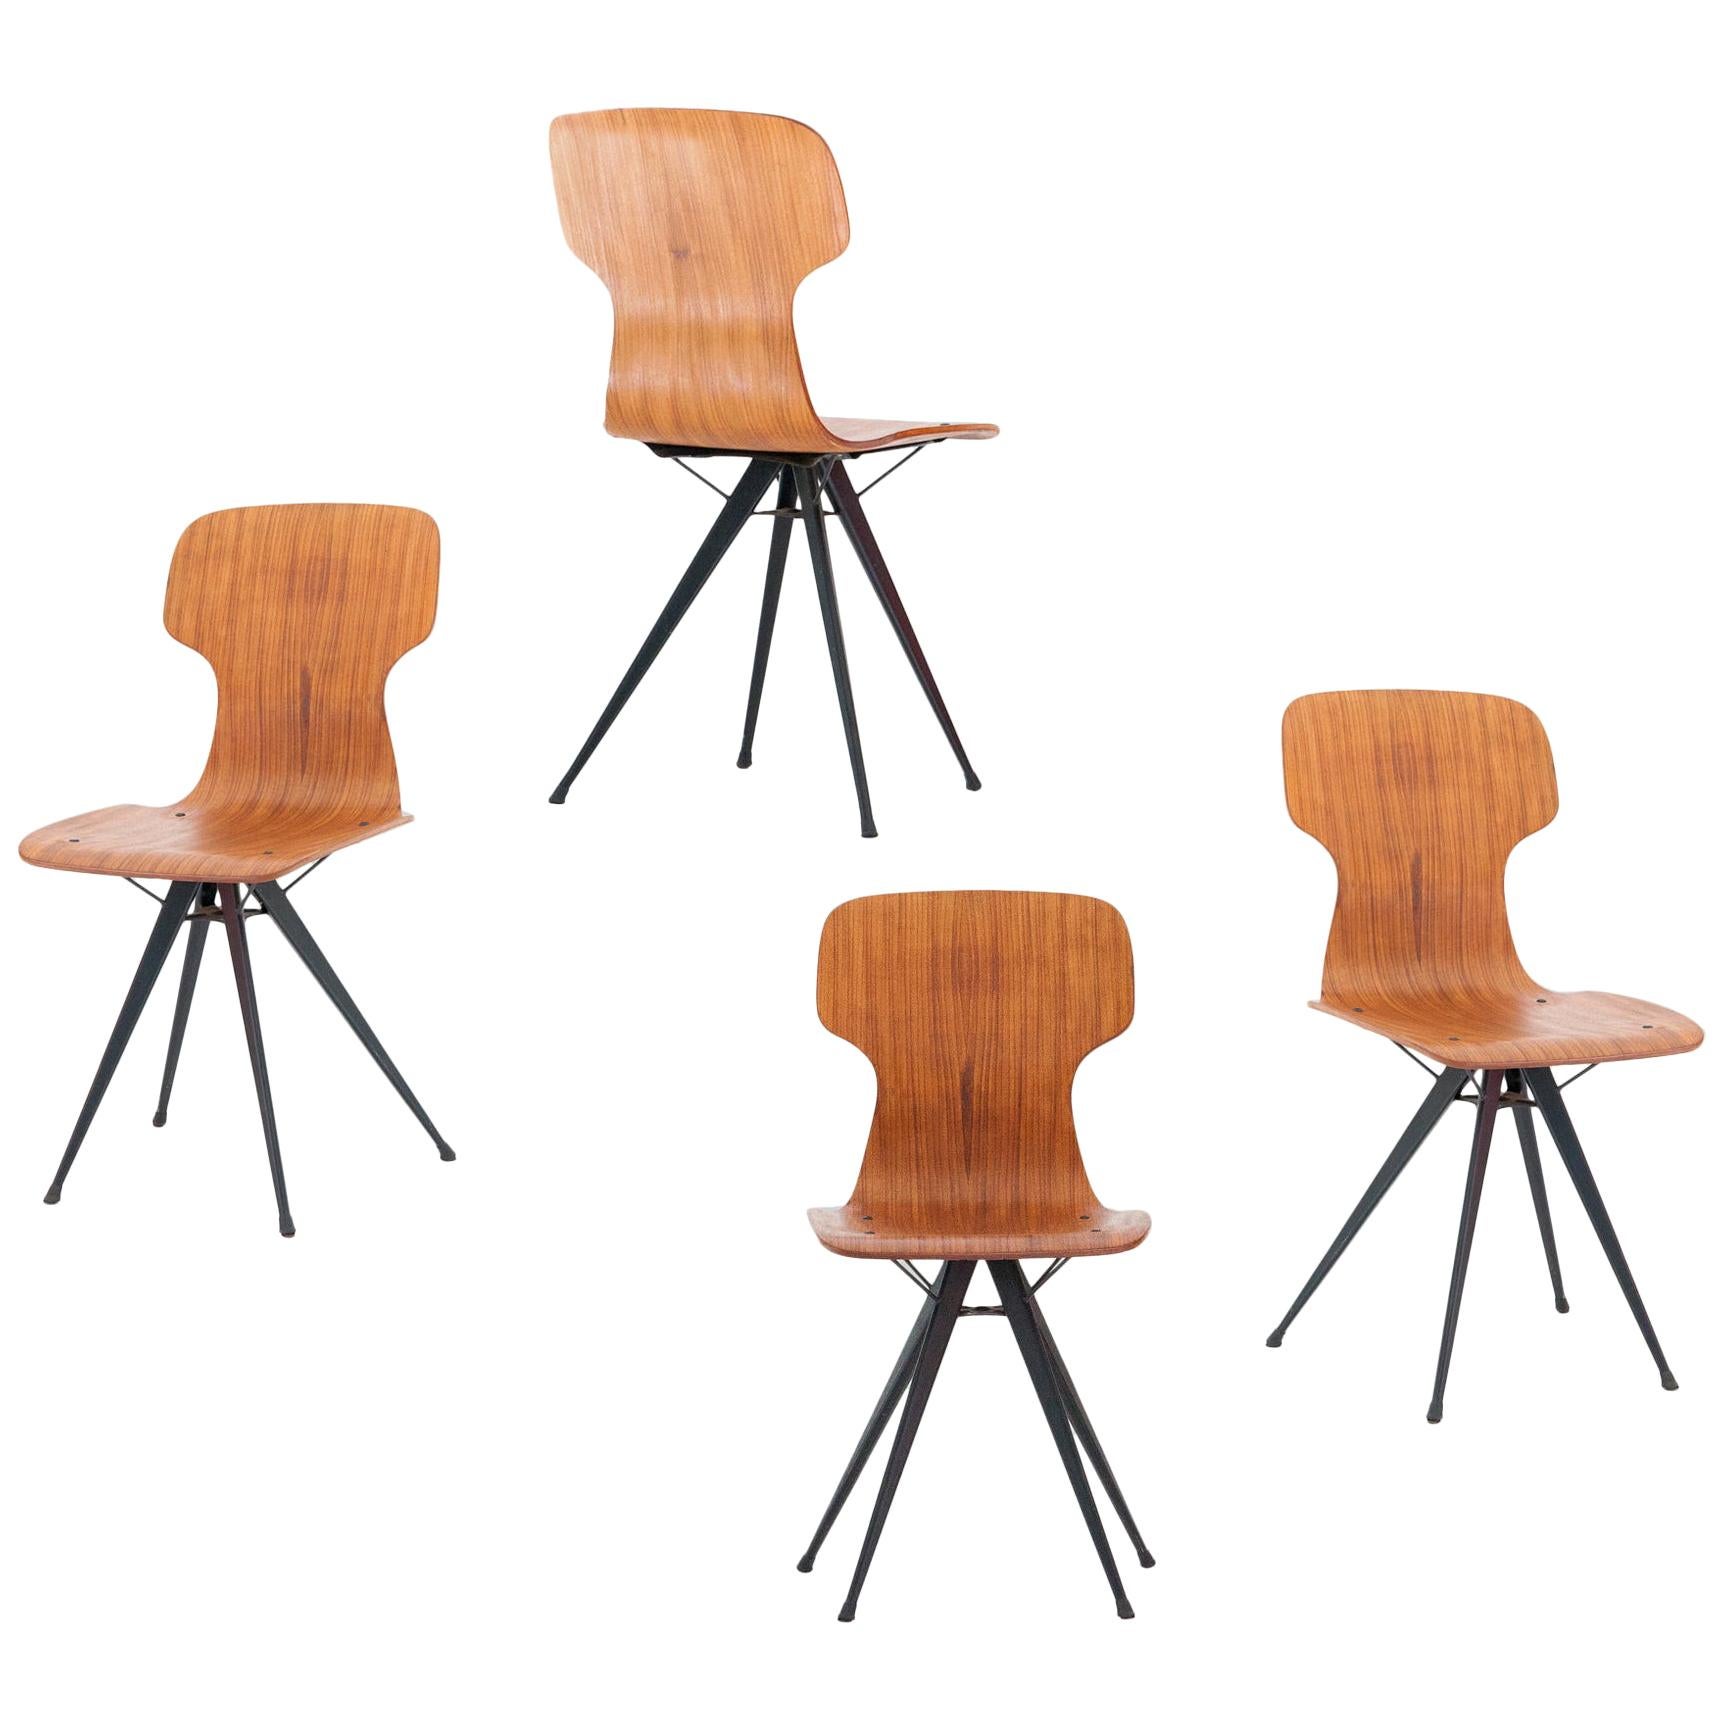 4 Italian Iron and Curved Teak Chairs, 1950s